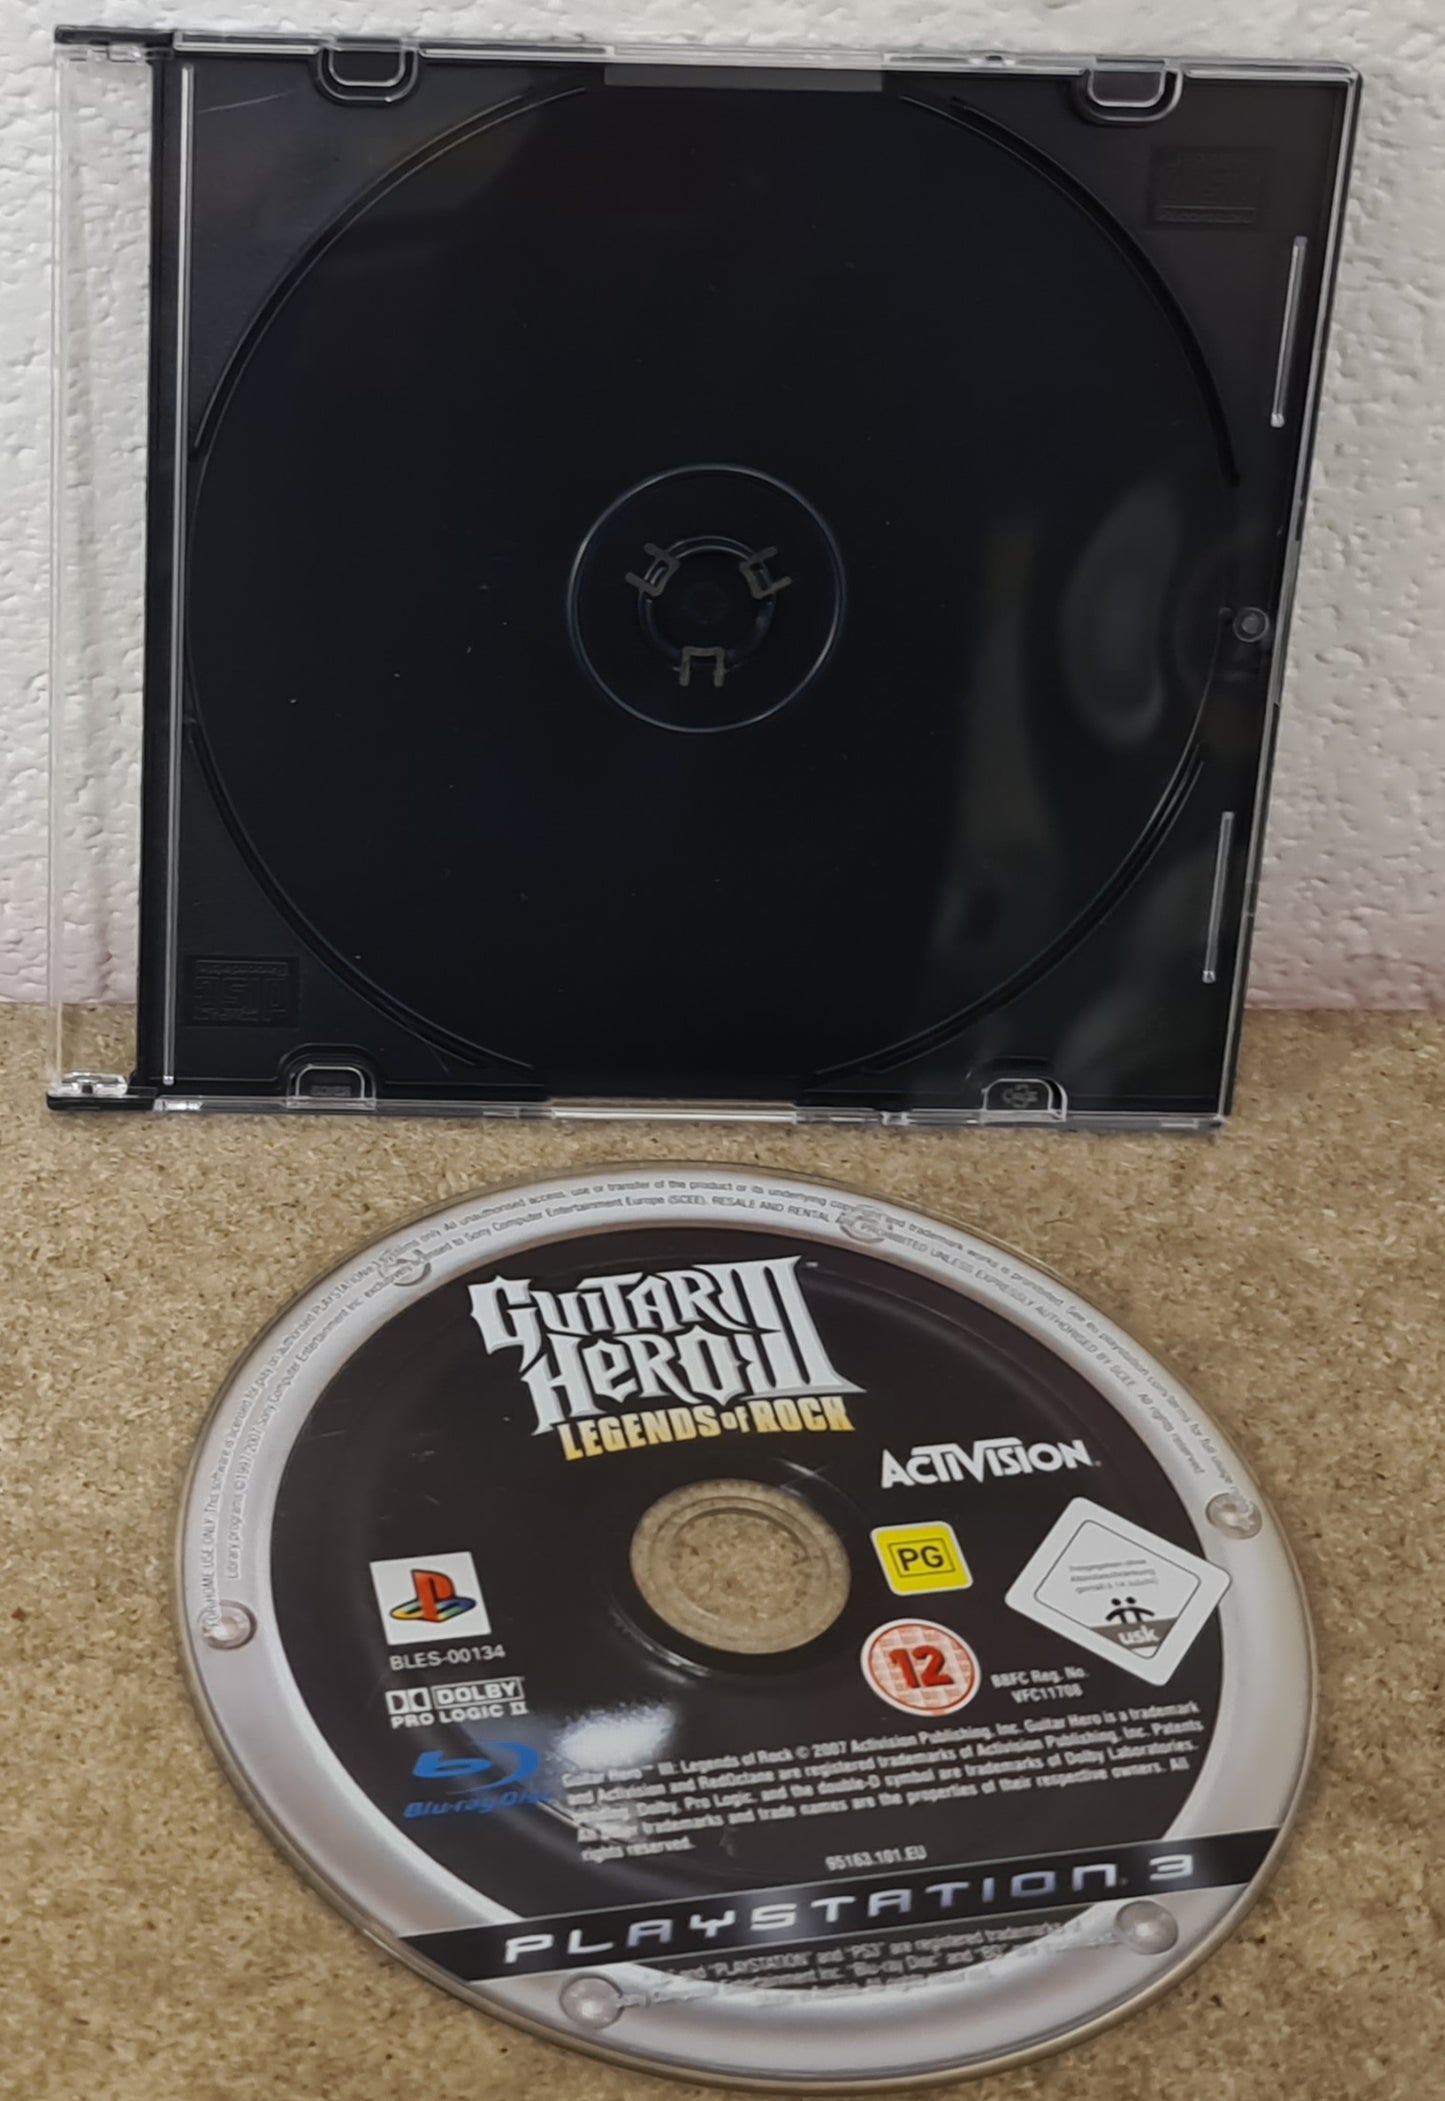 Guitar Hero III Legends of Rock Sony Playstation 3 (PS3) Game Disc Only